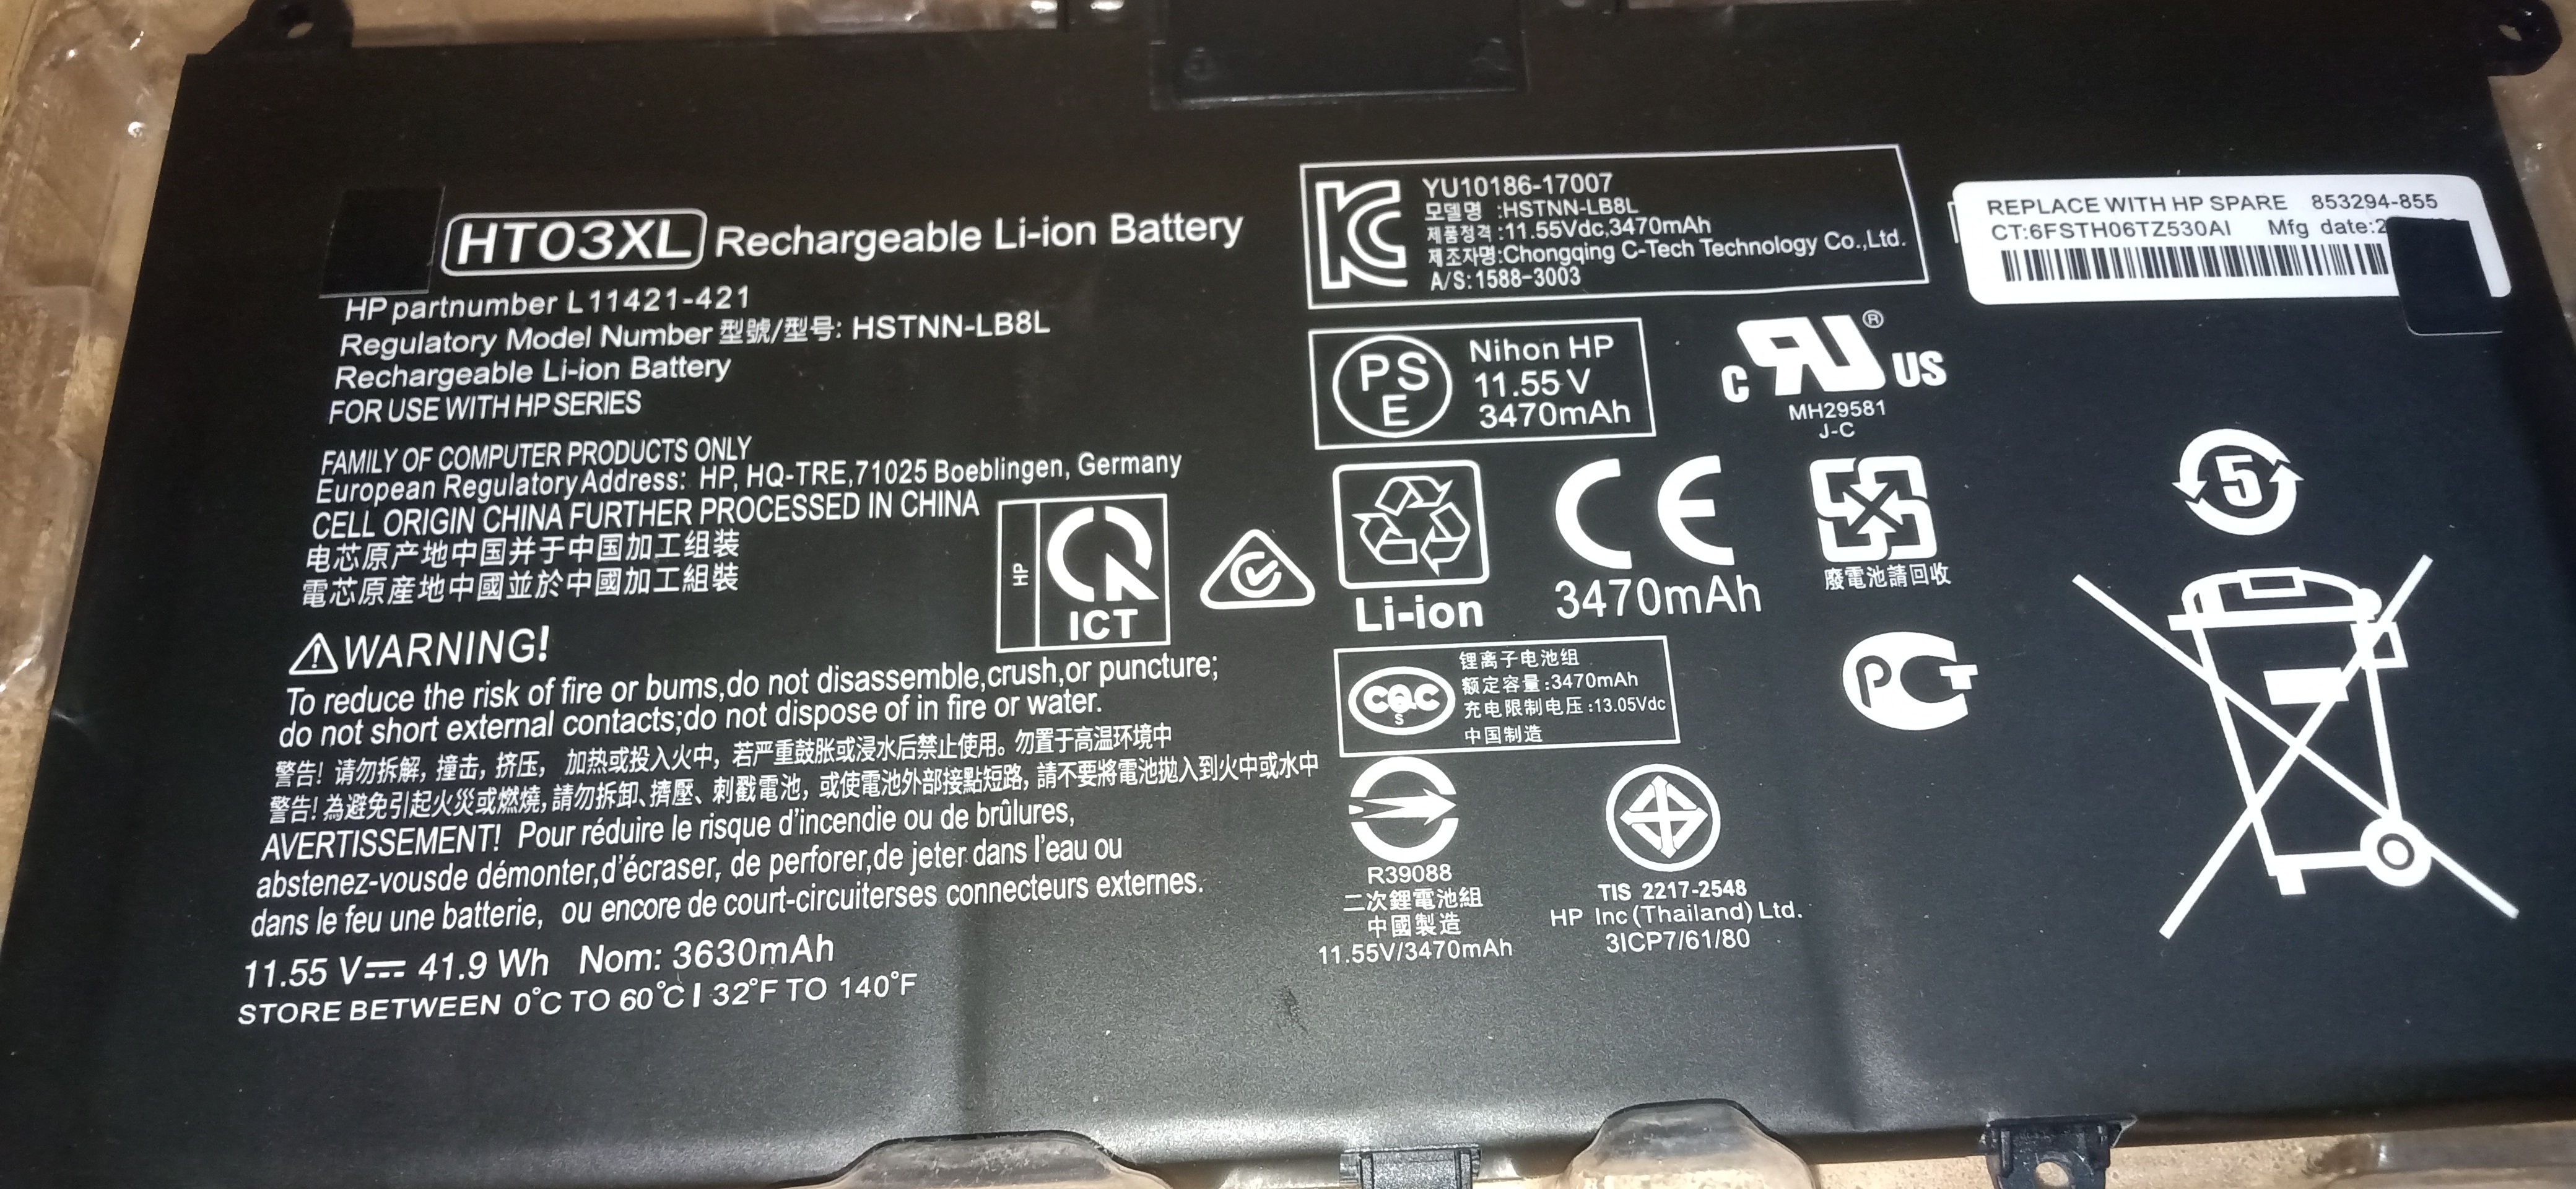 Solved: HP Pavilion x360 battery replacement - HP Support Community -  8174488